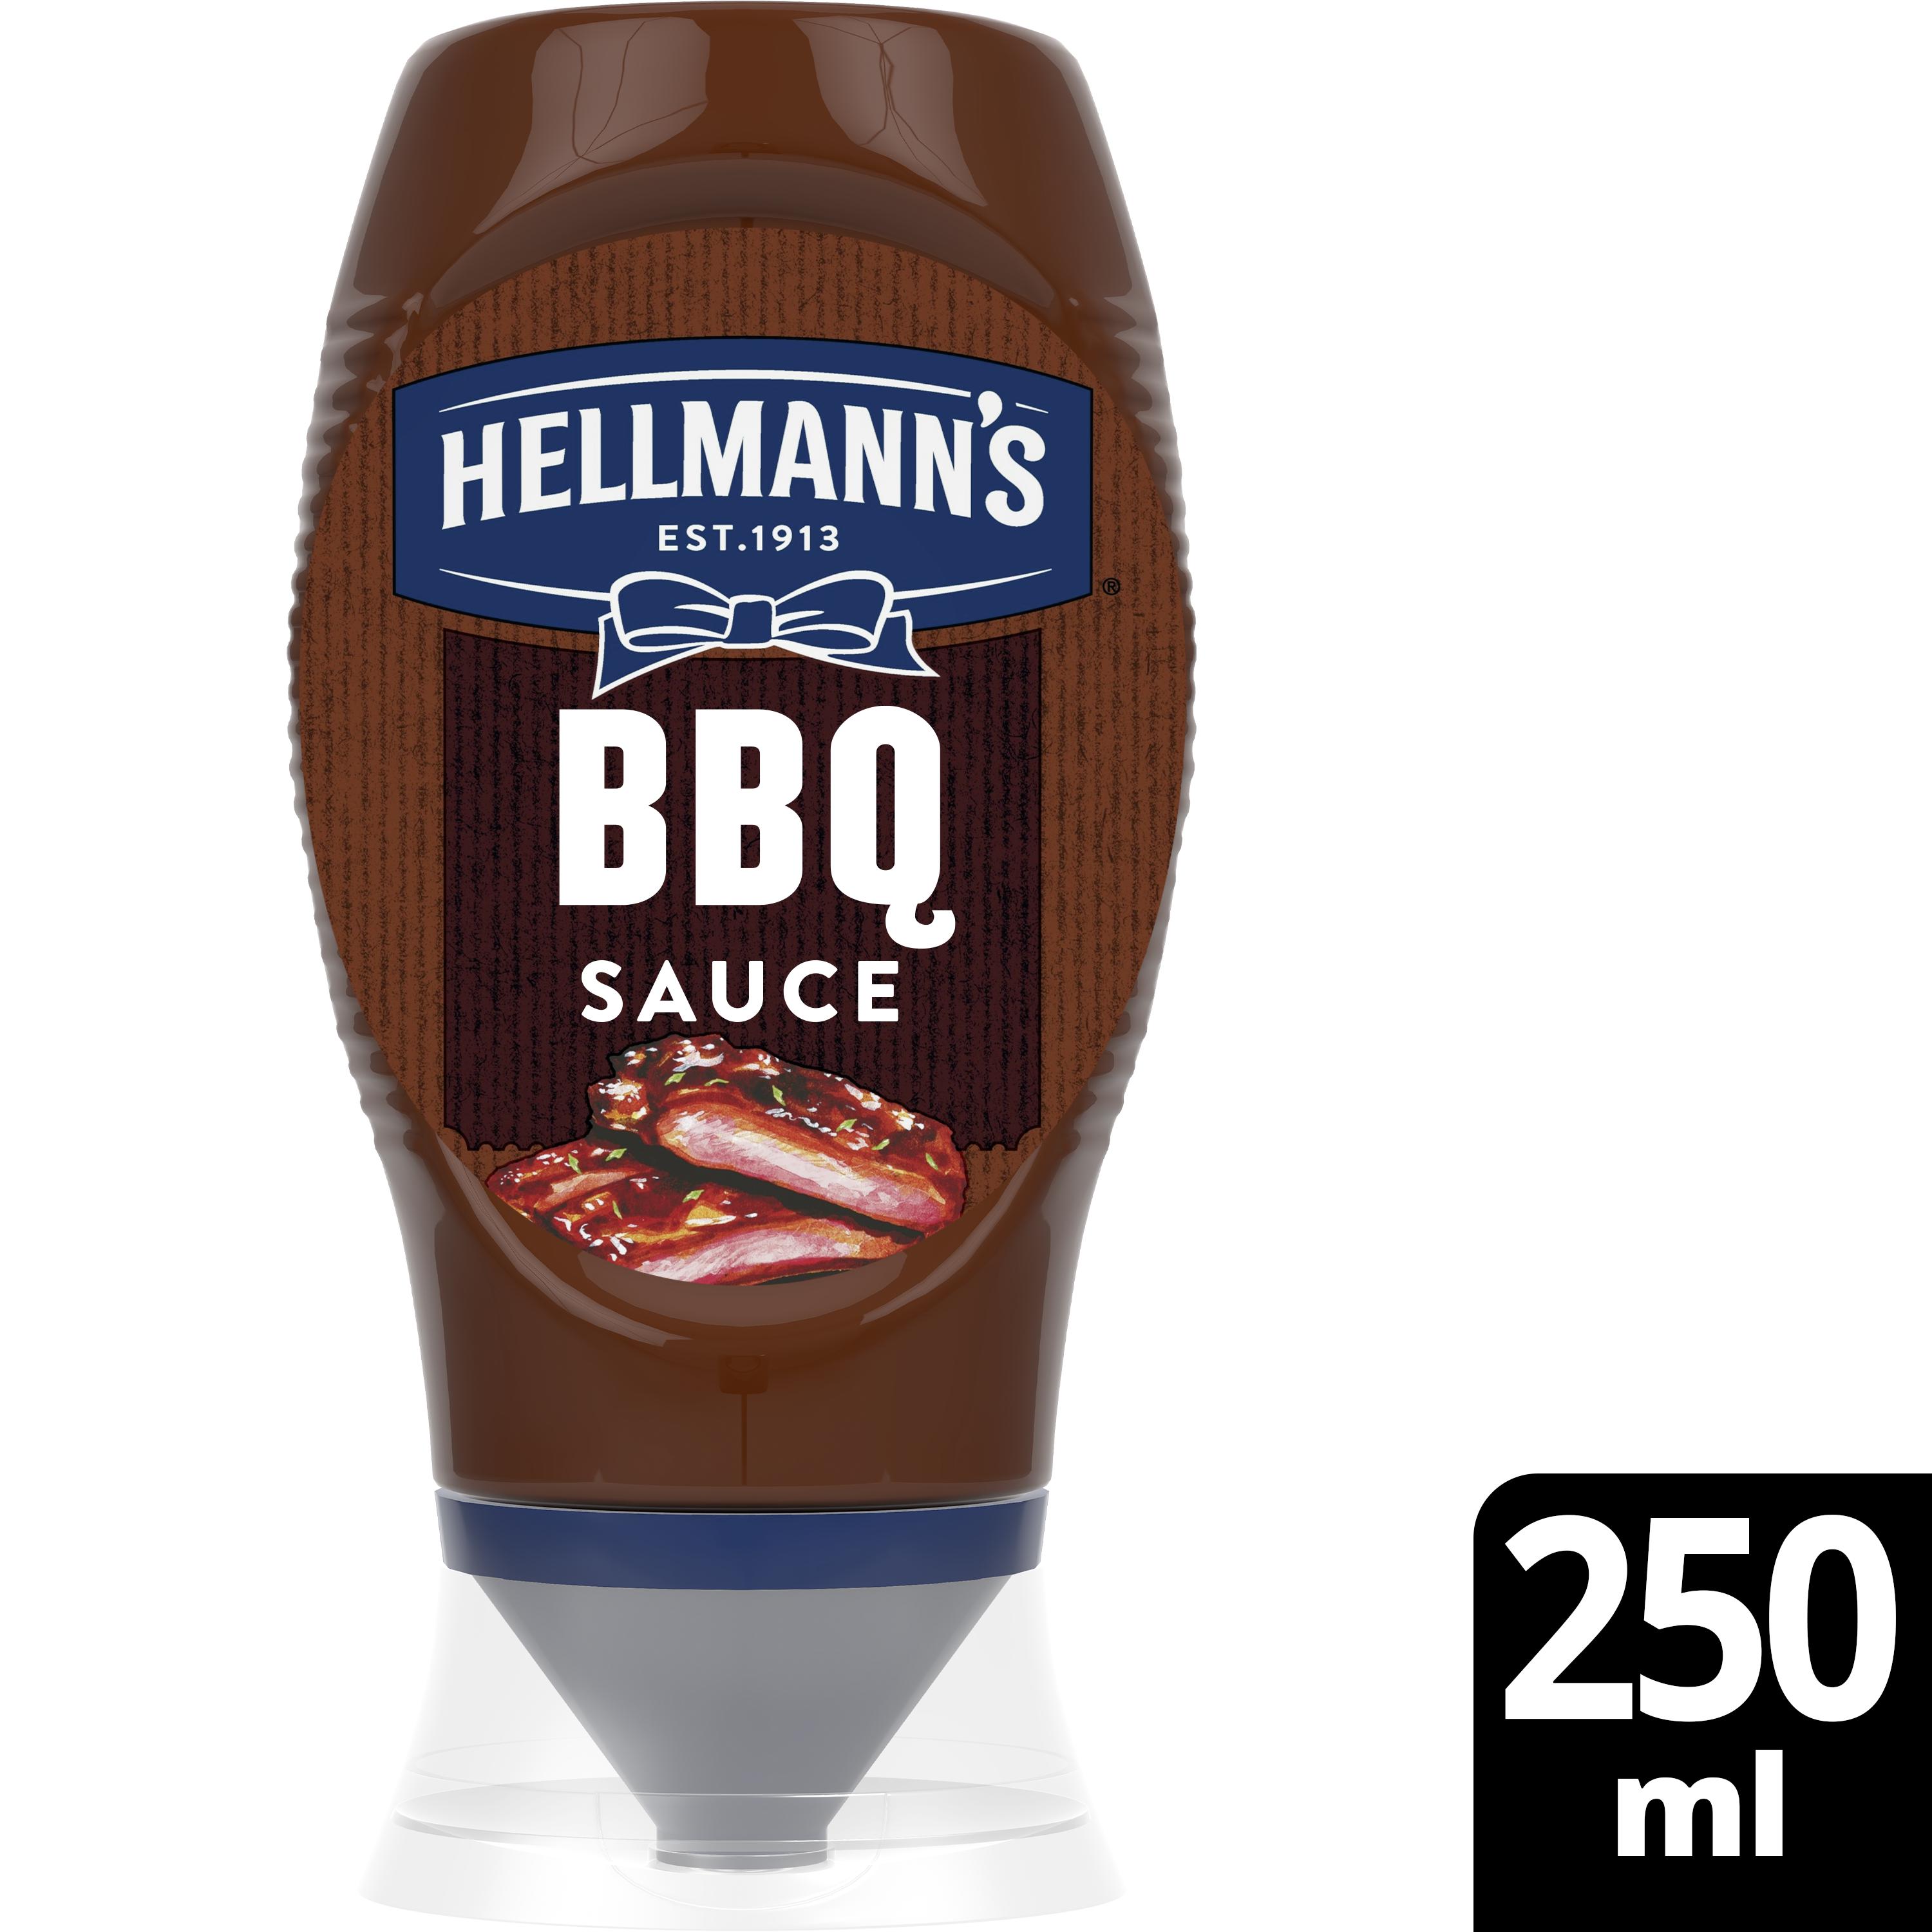 New Hellmann's barbecue sauce trio backed by £3m push, News